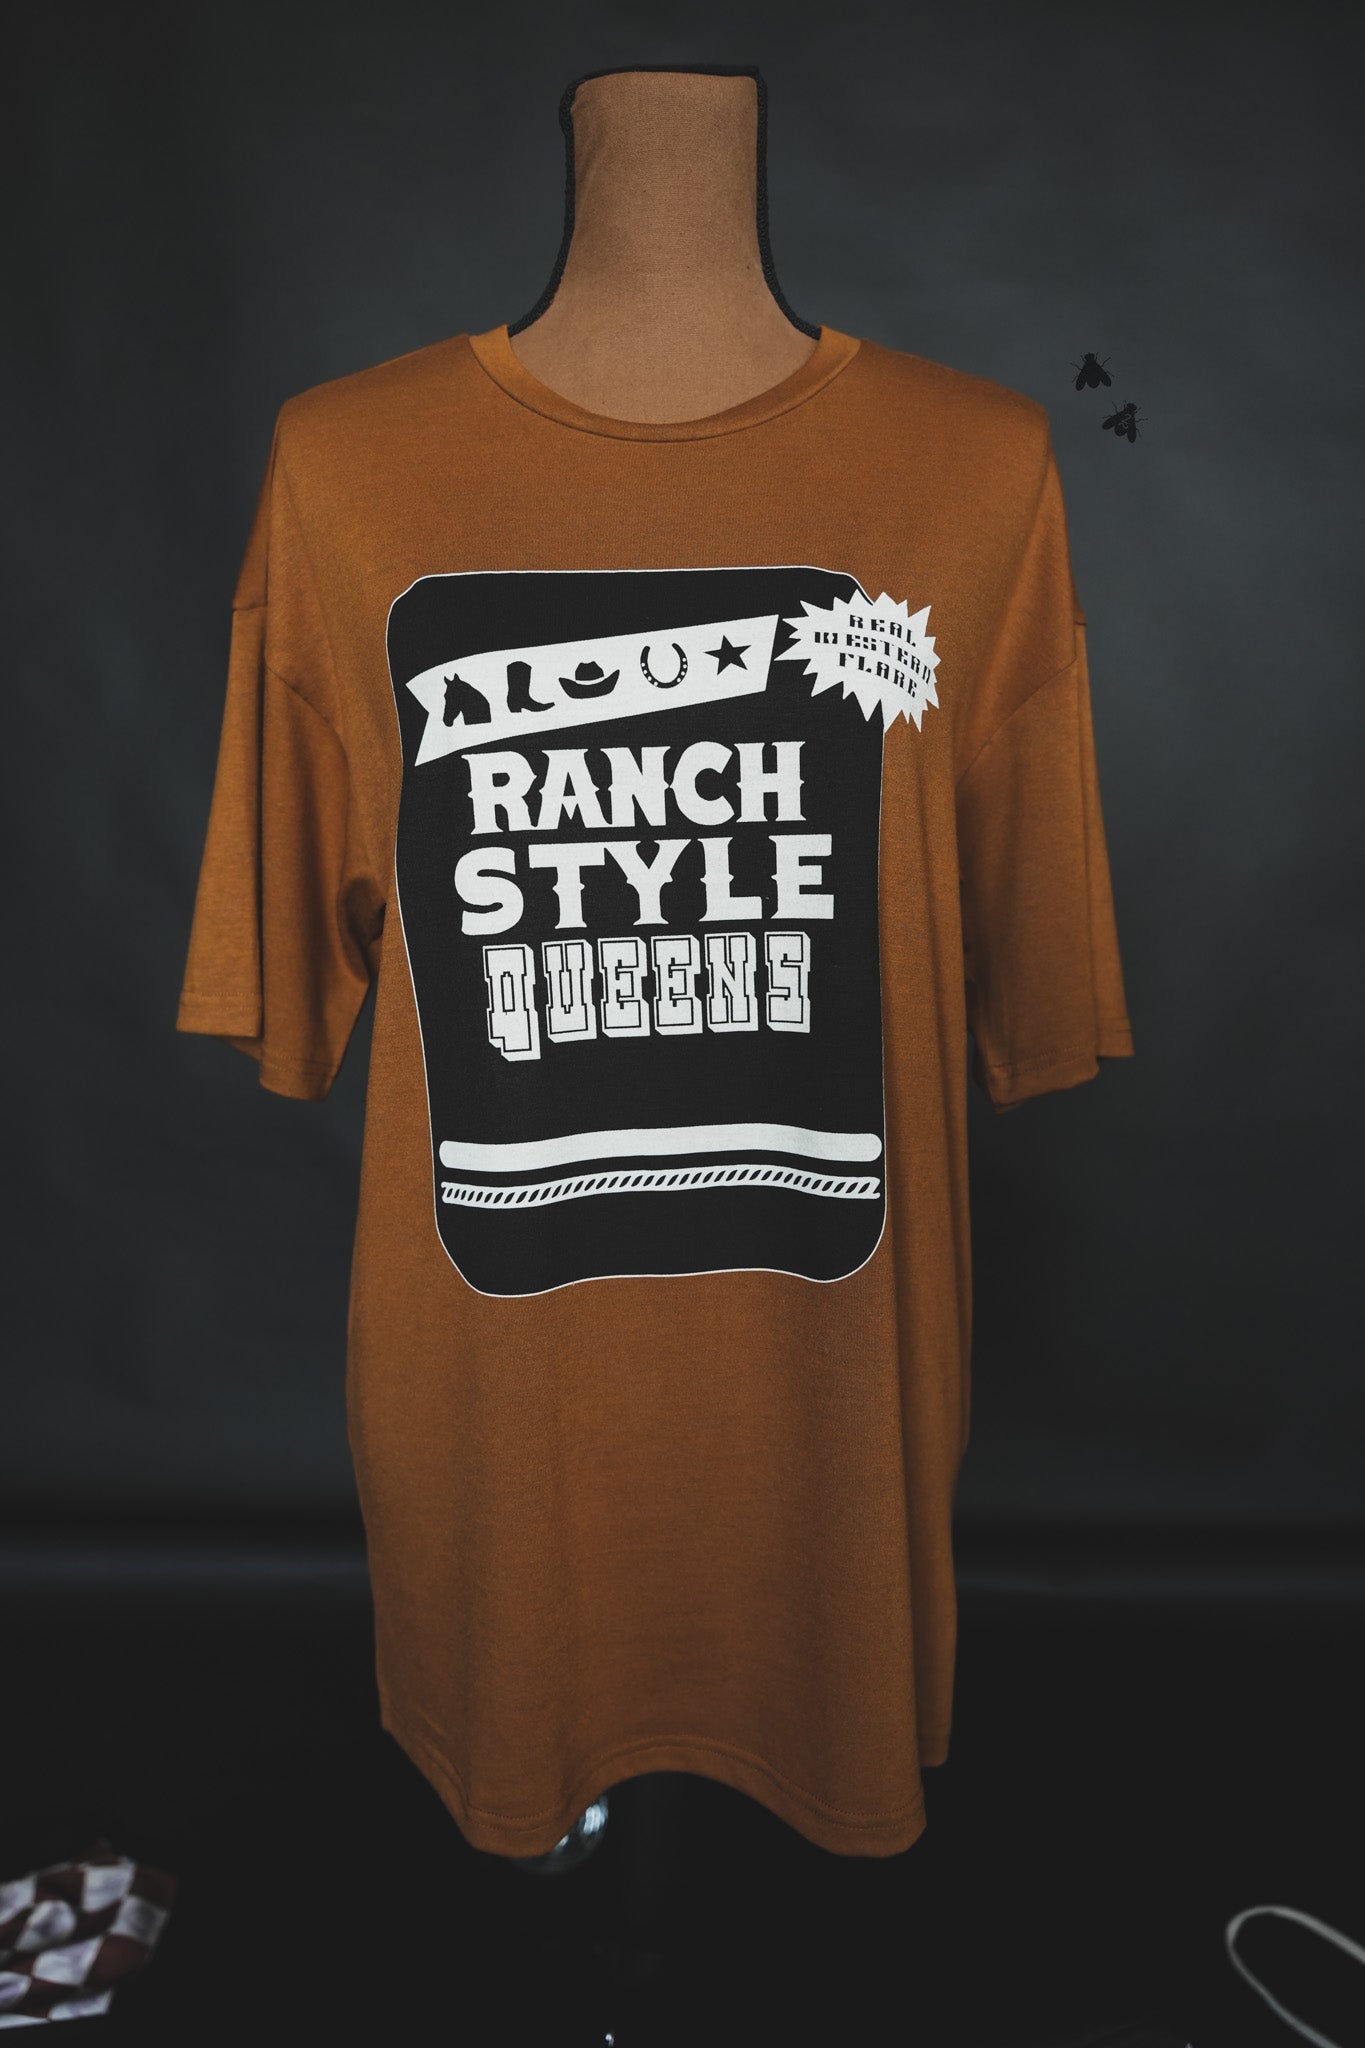 RANCH STYLE